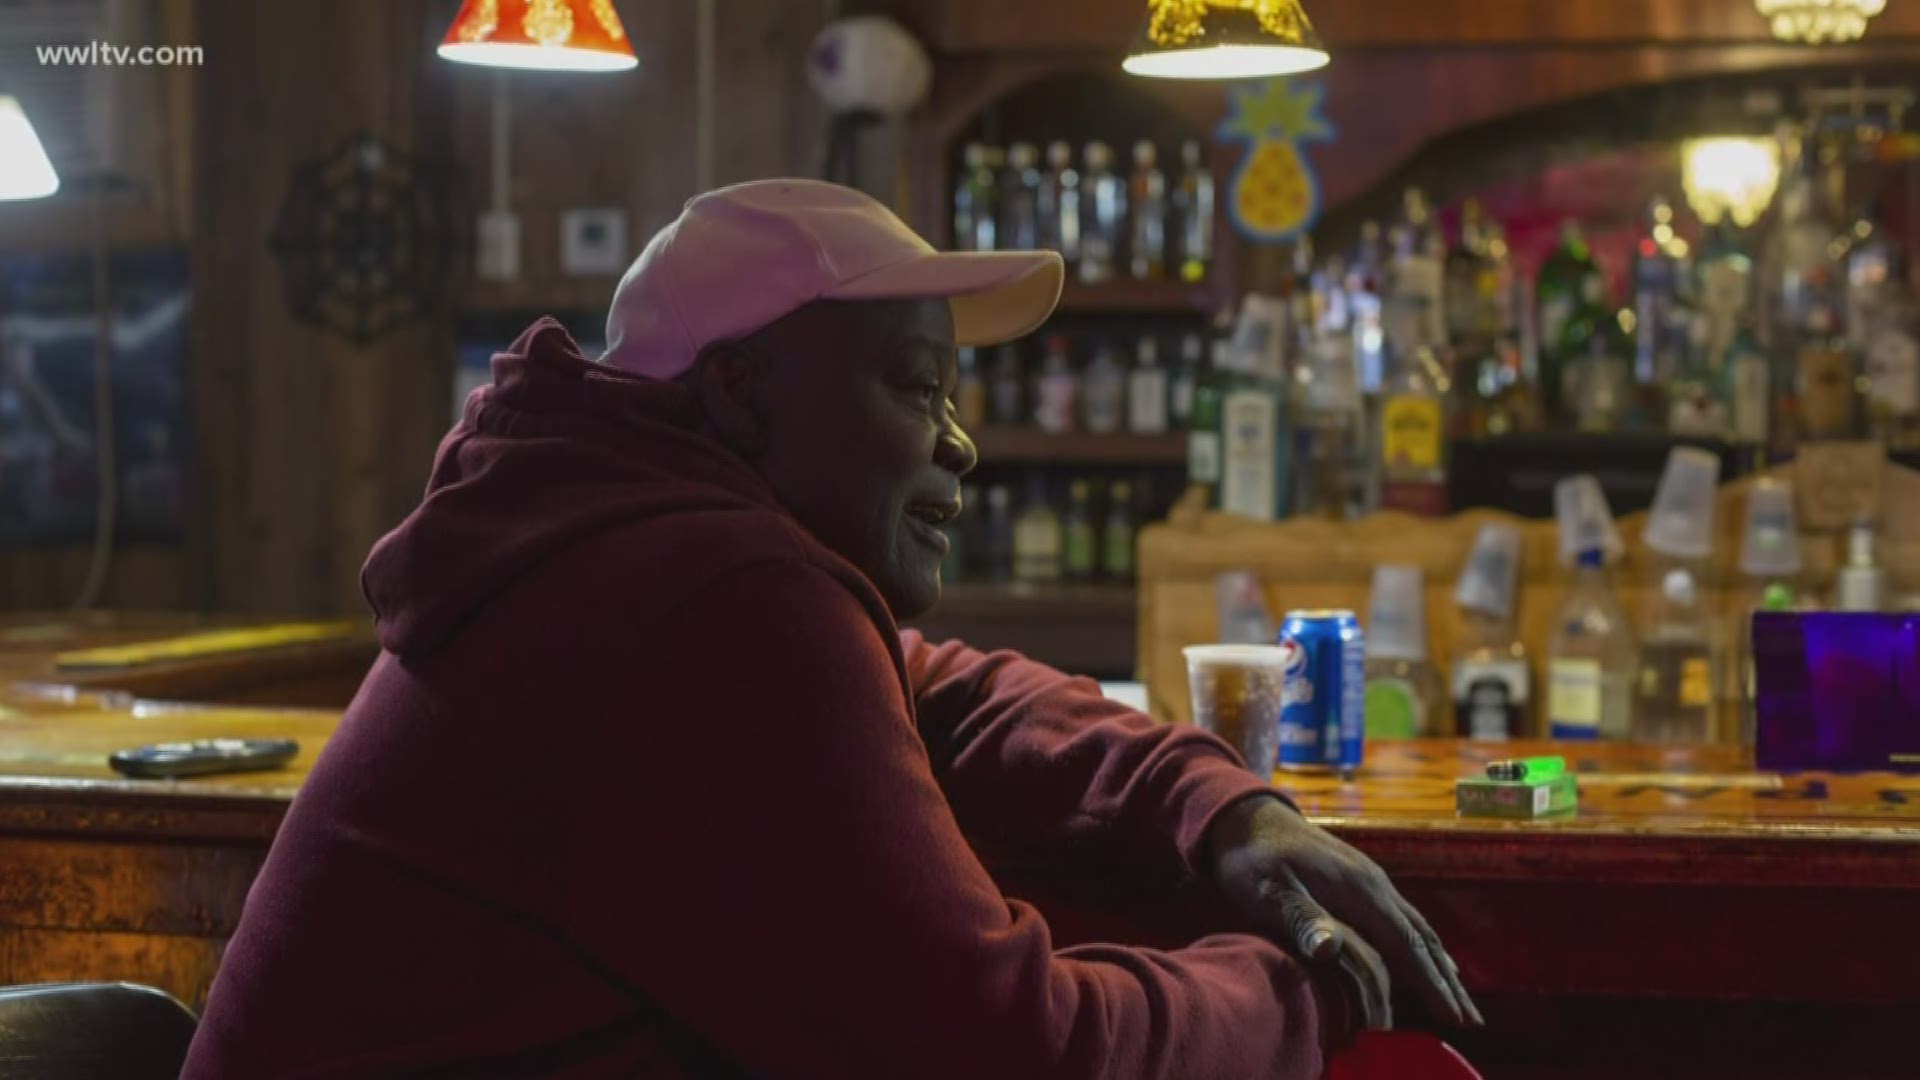 A local writer and photographer made it his mission to preserve a part of life in New Orleans he says is vanishing: Black-owned bars.